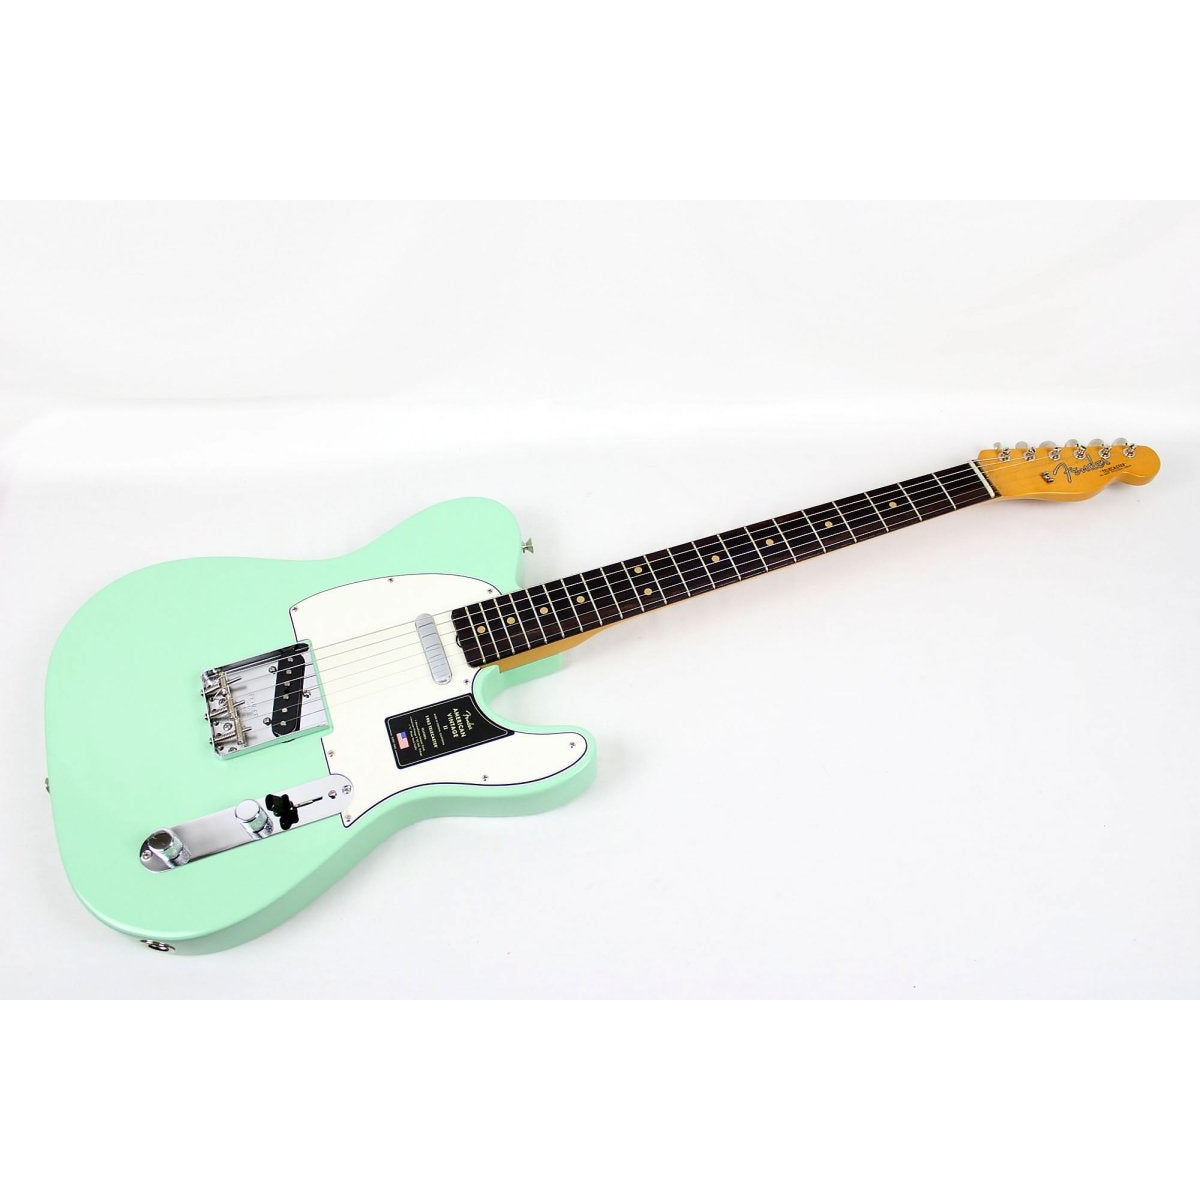 Fender American Vintage II '63 Telecaster - Surf Green | with OHSC *USED* - Leitz Music-885978840878-V2317601